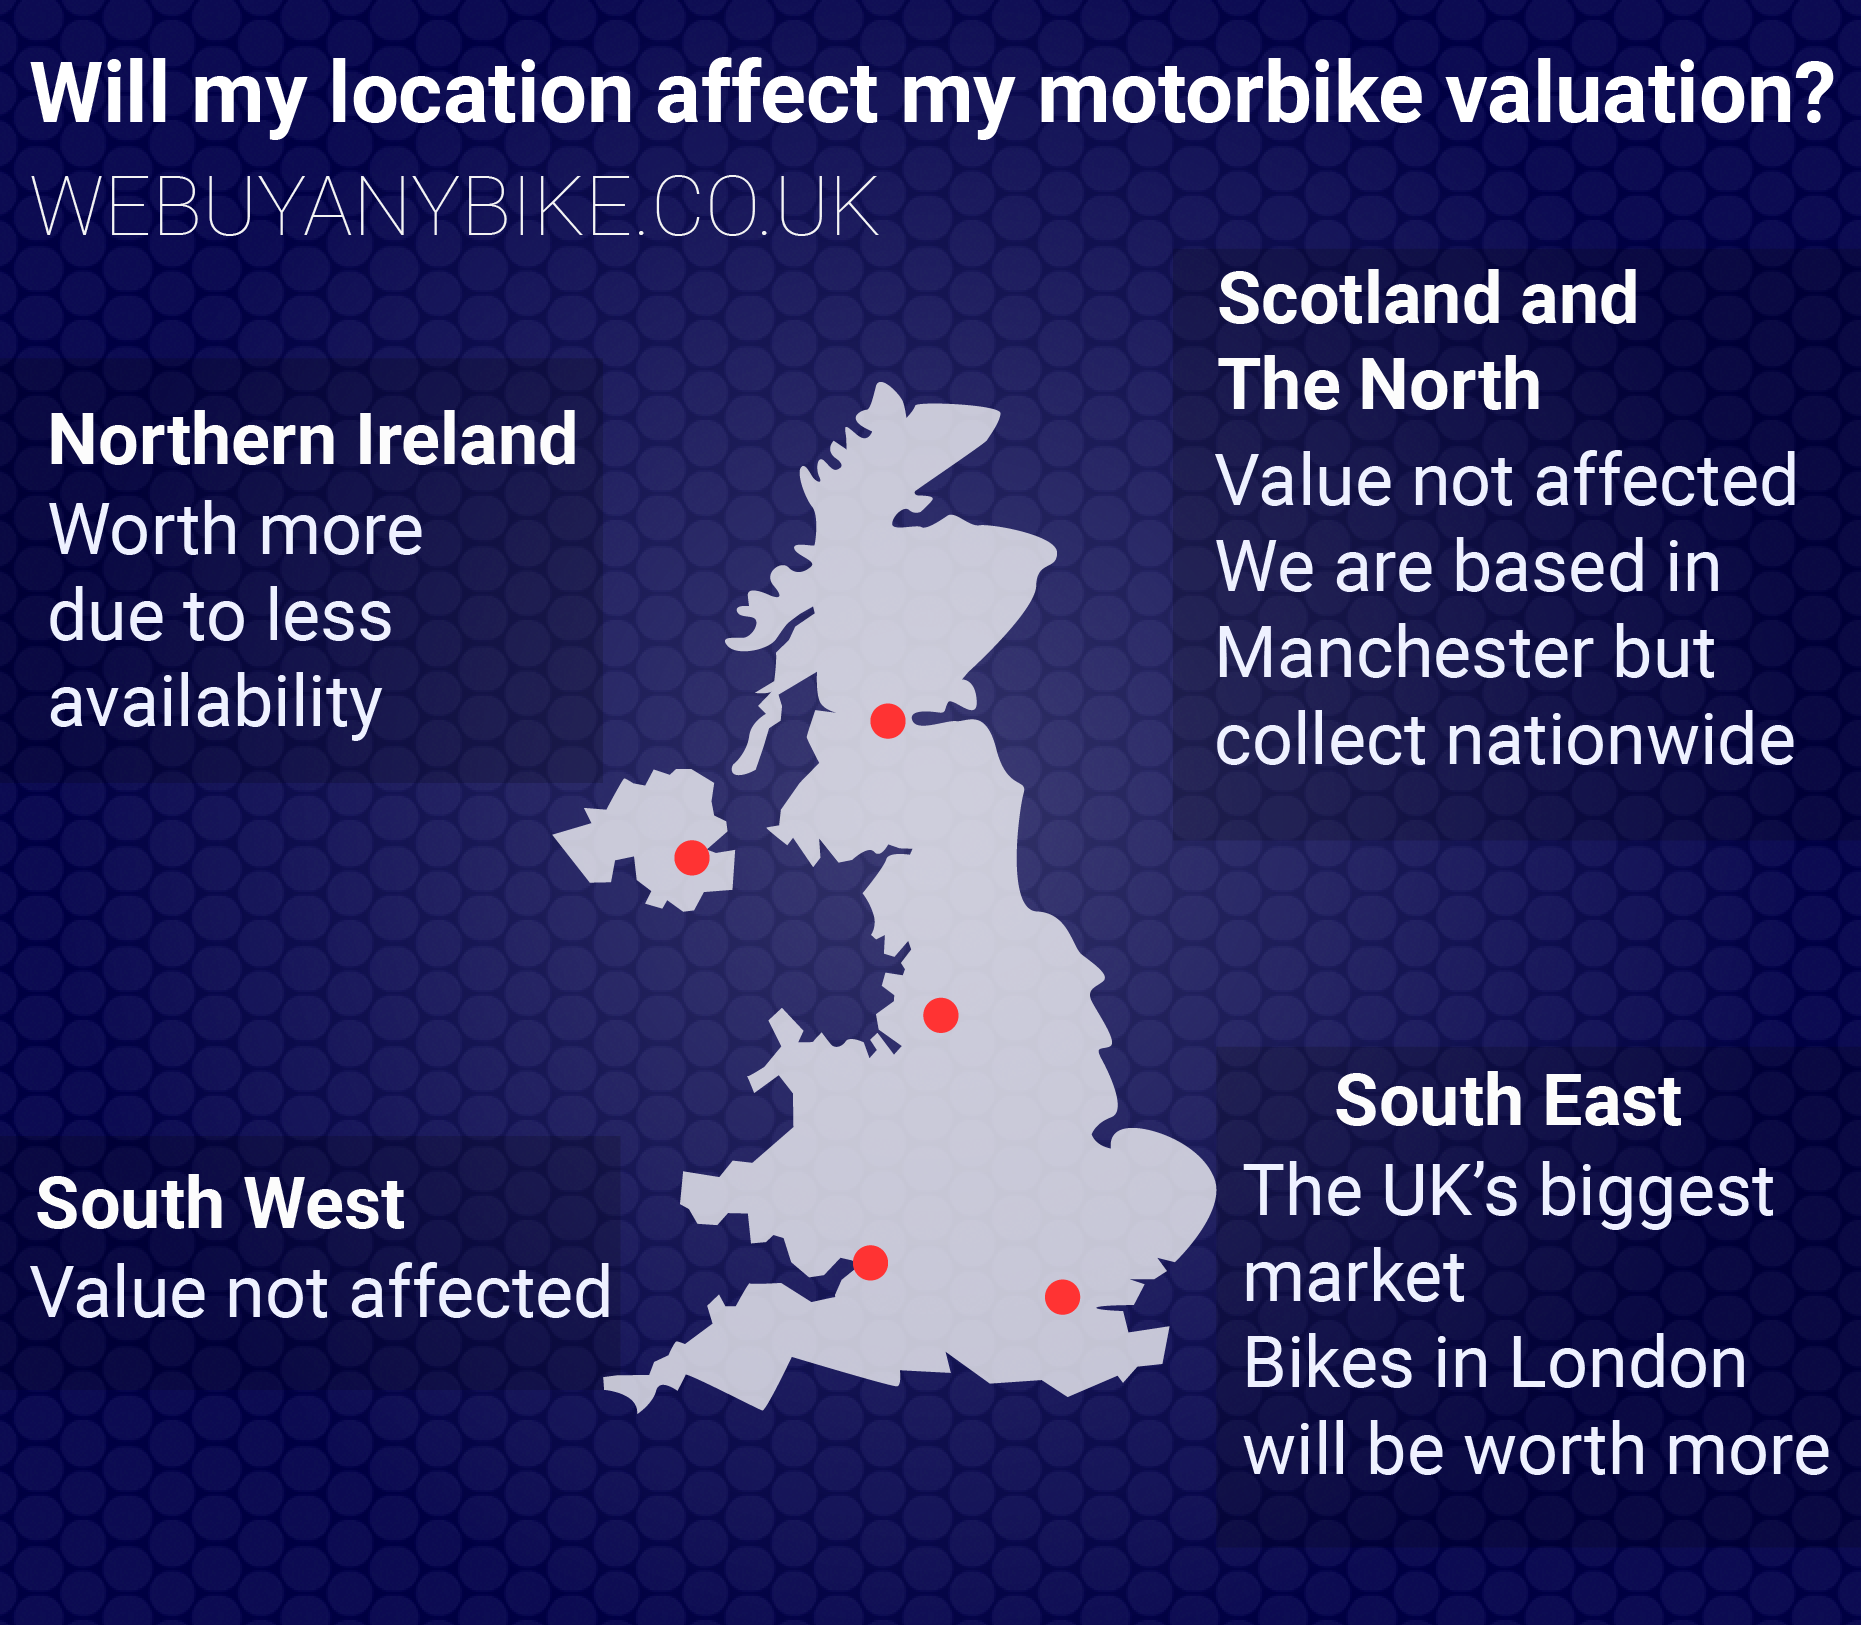 Infographic showing how location affects motorcycle value